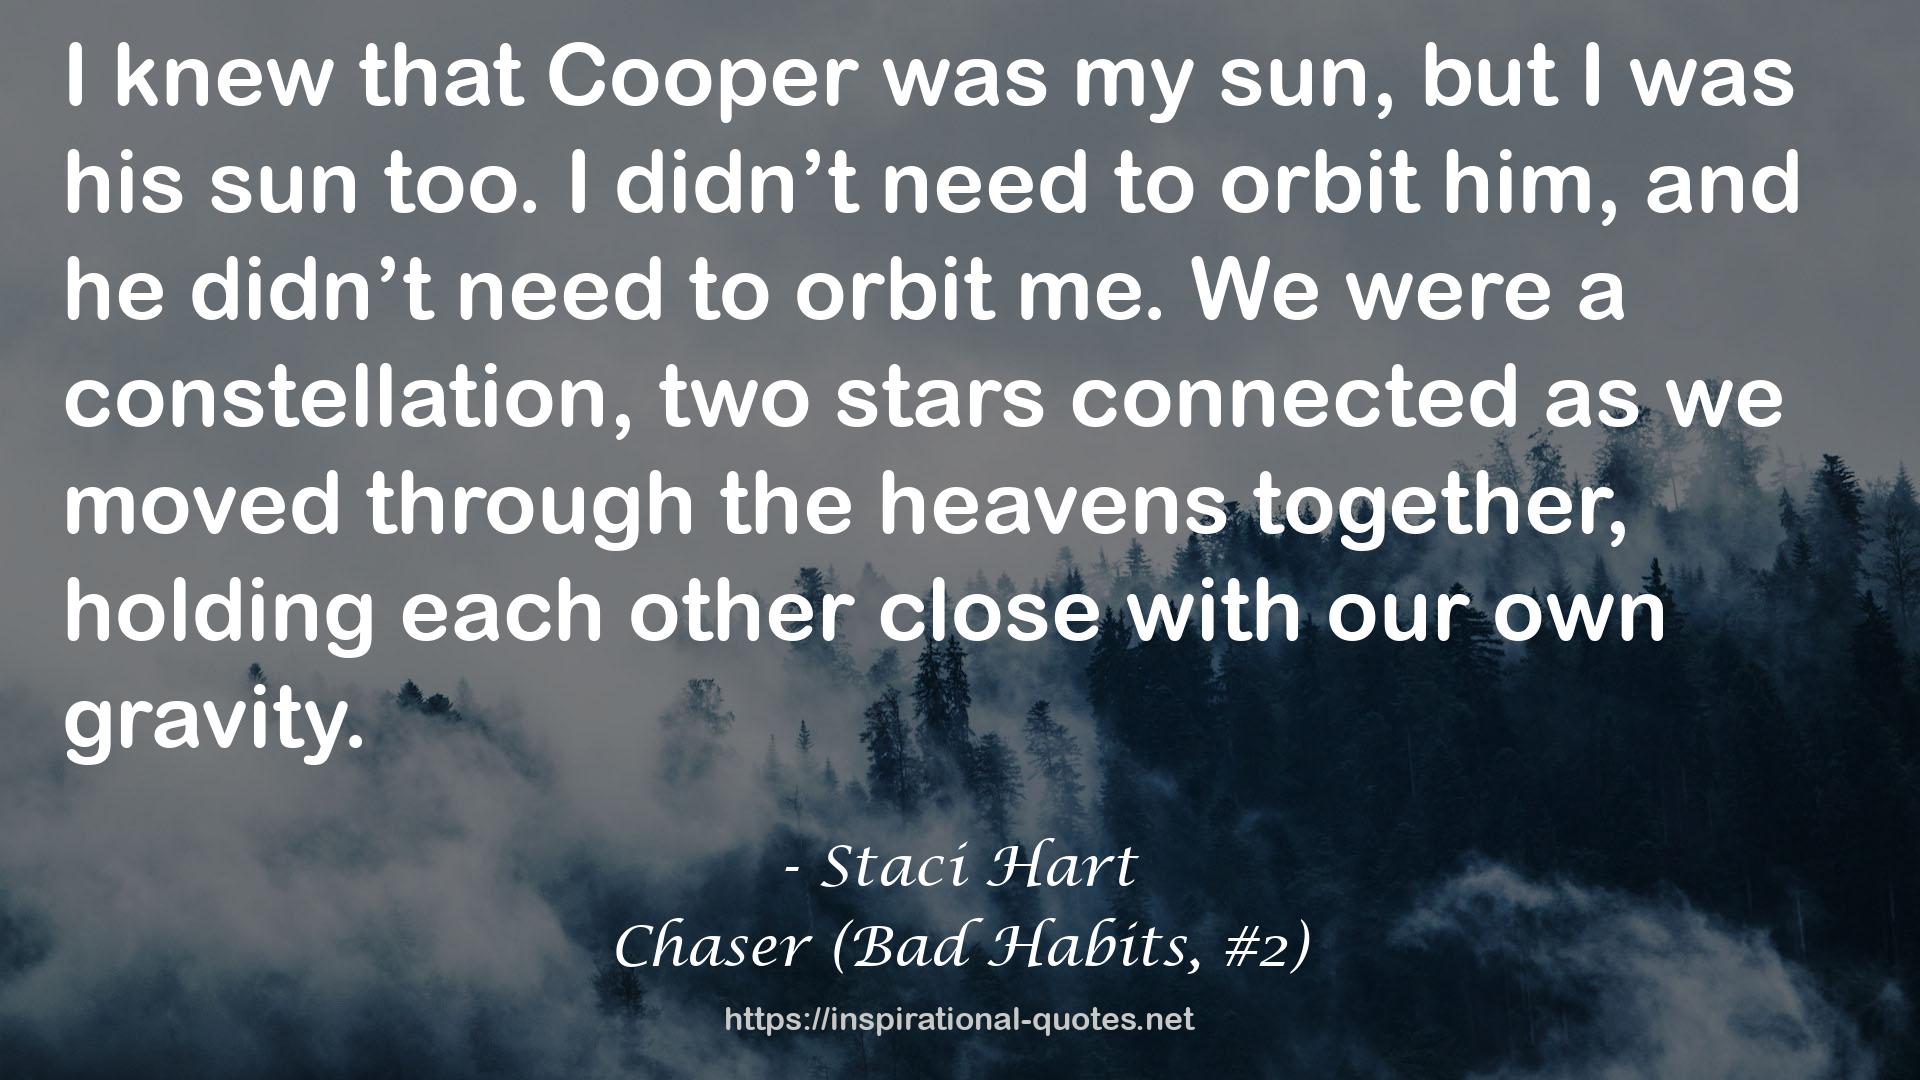 Chaser (Bad Habits, #2) QUOTES